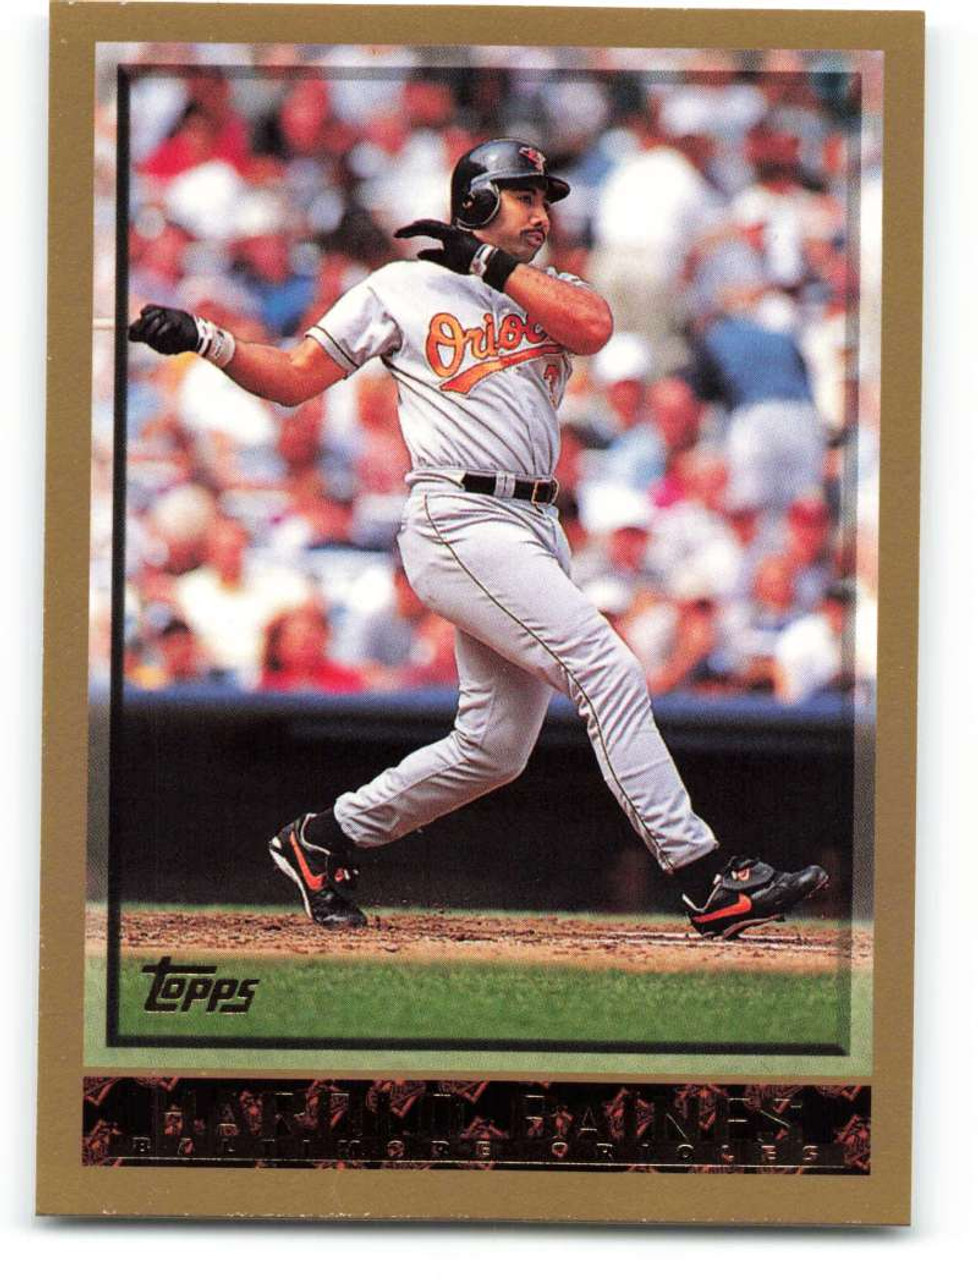 1998 Topps #399 Harold Baines VG Baltimore Orioles - Under the